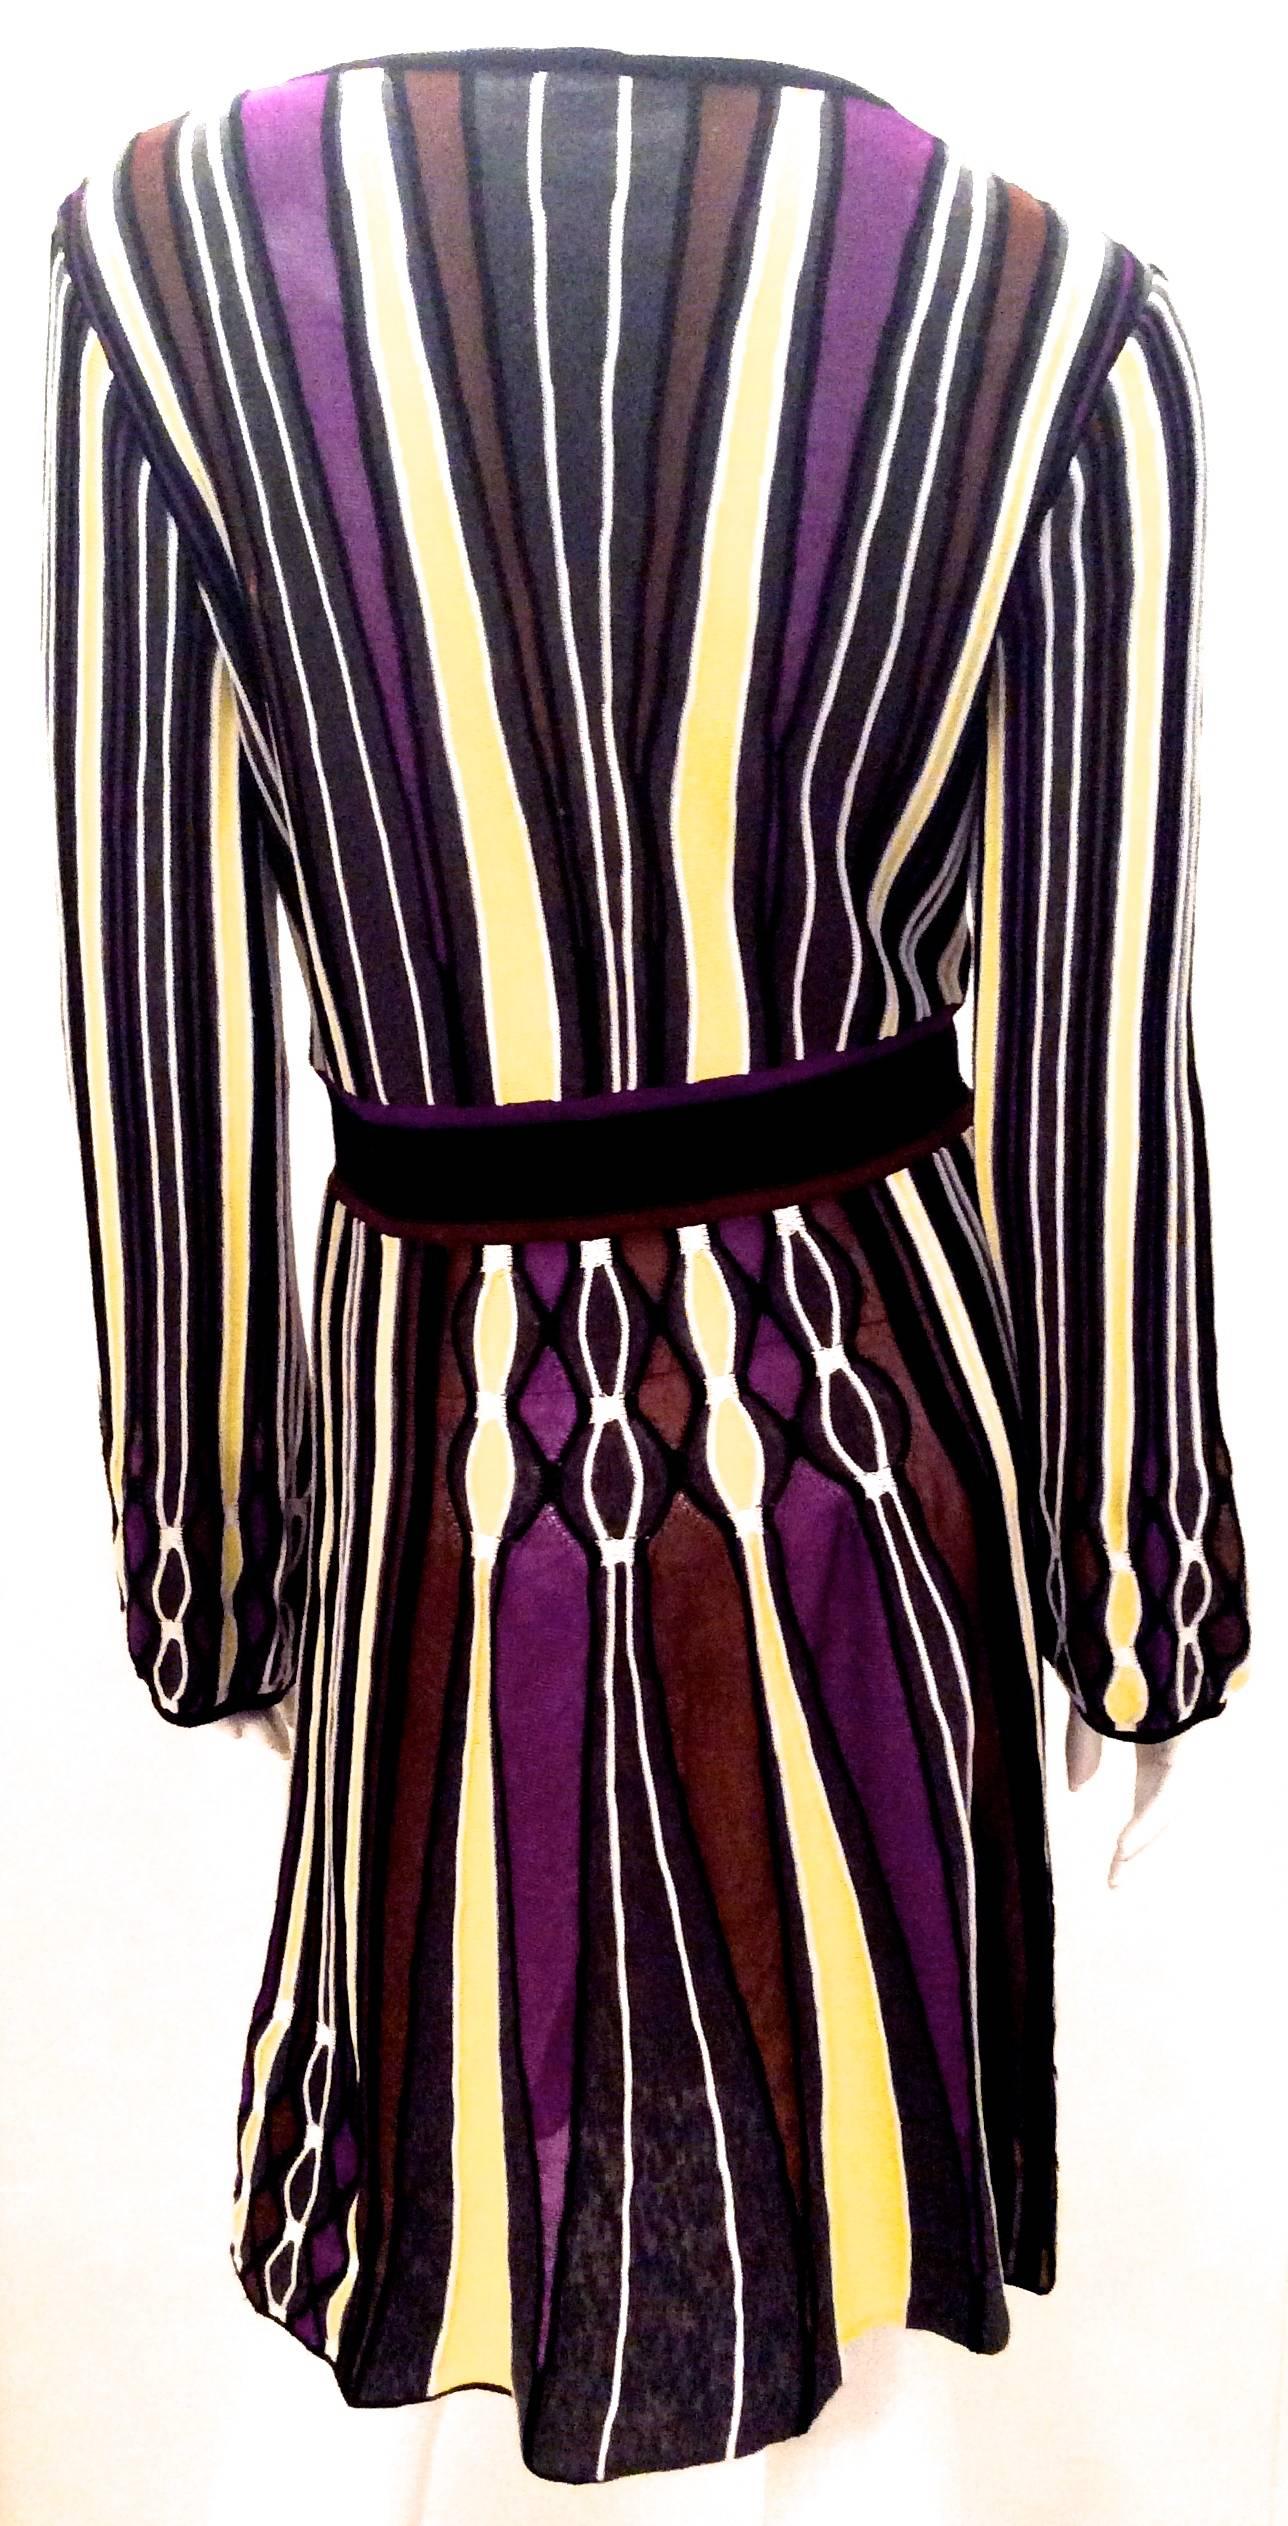 Presented here is a magnificent dress from Missoni. The dress is a series of vertical yellow, gray, black, purple, and brown lines of different sizings with a thick horizontal black line around the waist. The dress has long sleeves. There is a V